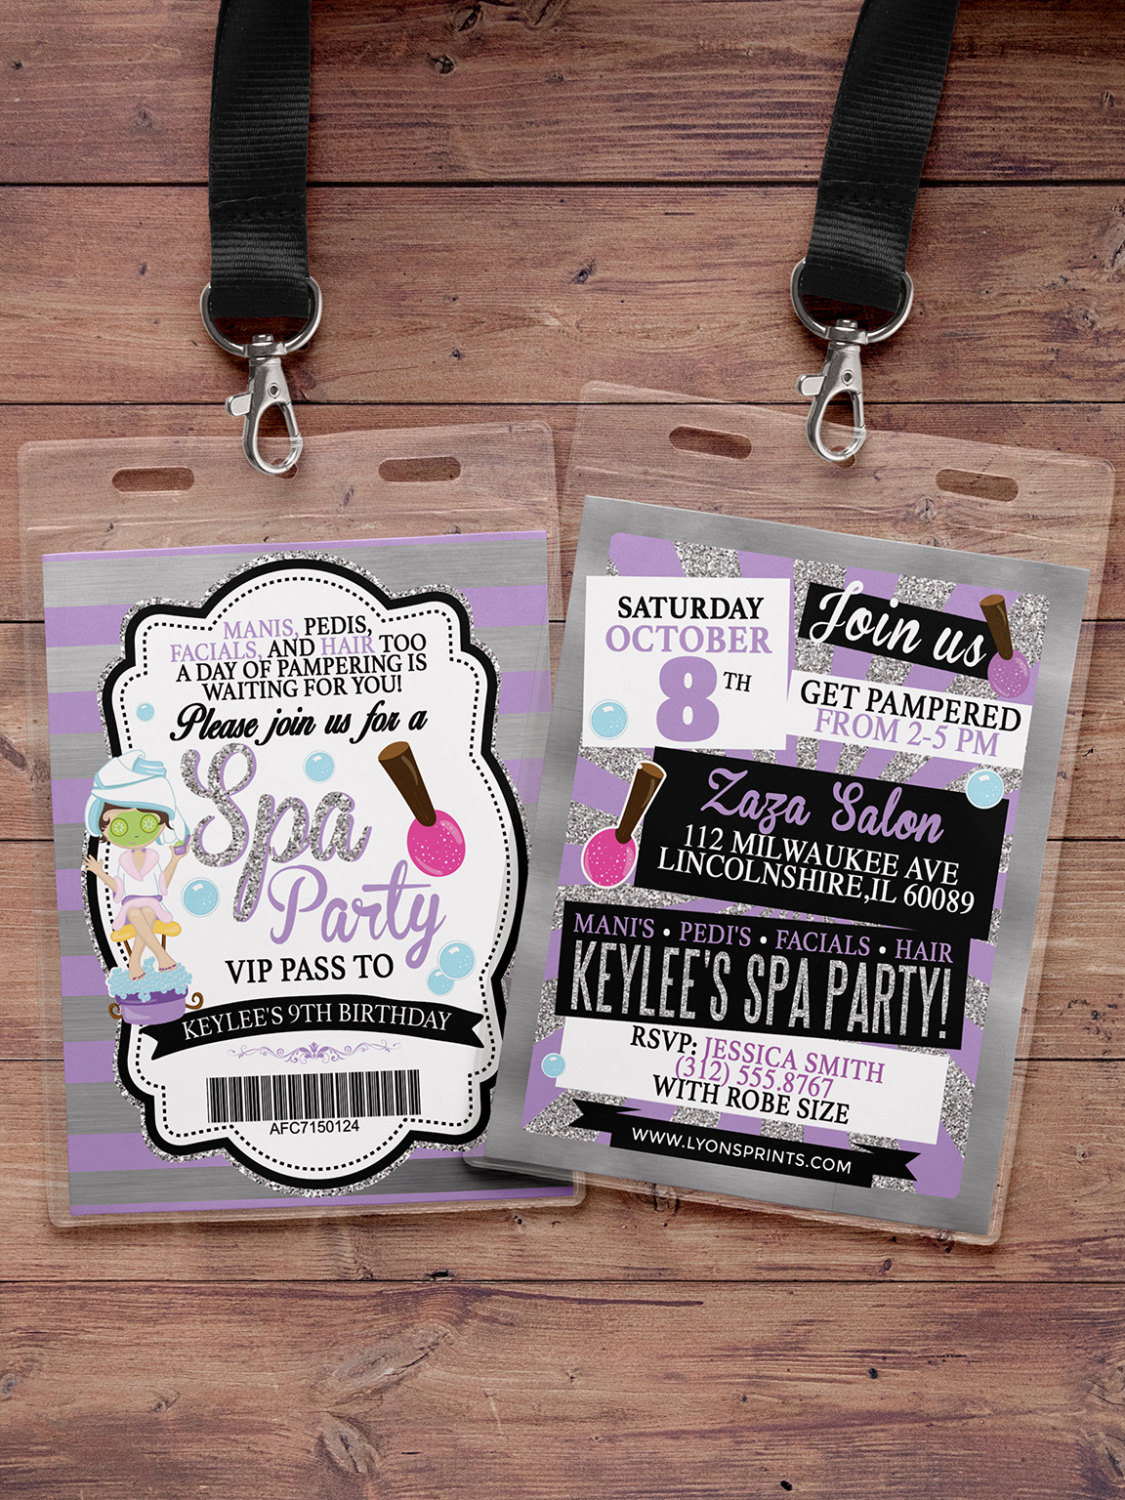 Spa Party Favor Tags template